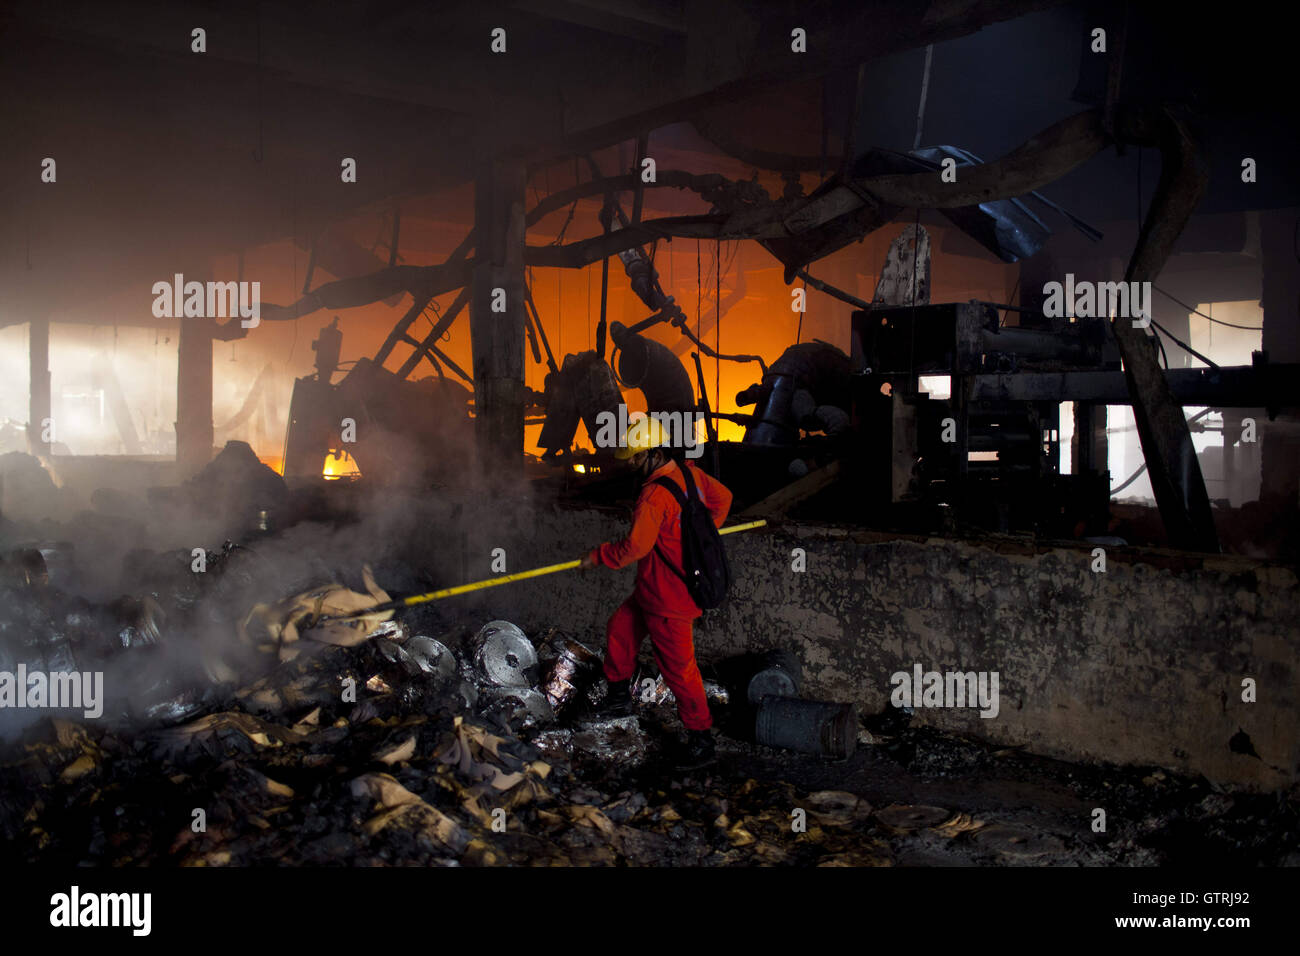 Dhaka, Dhaka, Bangladesh. 10th Sep, 2016. September 10, 2016 Tongi, Bangladesh ""“ Bangladeshi firefighters try to douse flames after an explosion made a factory in Tongi. Official said at least 23 people were killed and 70 injured in a boiler explosion that caused fire at a garment-packaging factory in Tongi near Gazipur. Credit:  K M Asad/ZUMA Wire/Alamy Live News Stock Photo